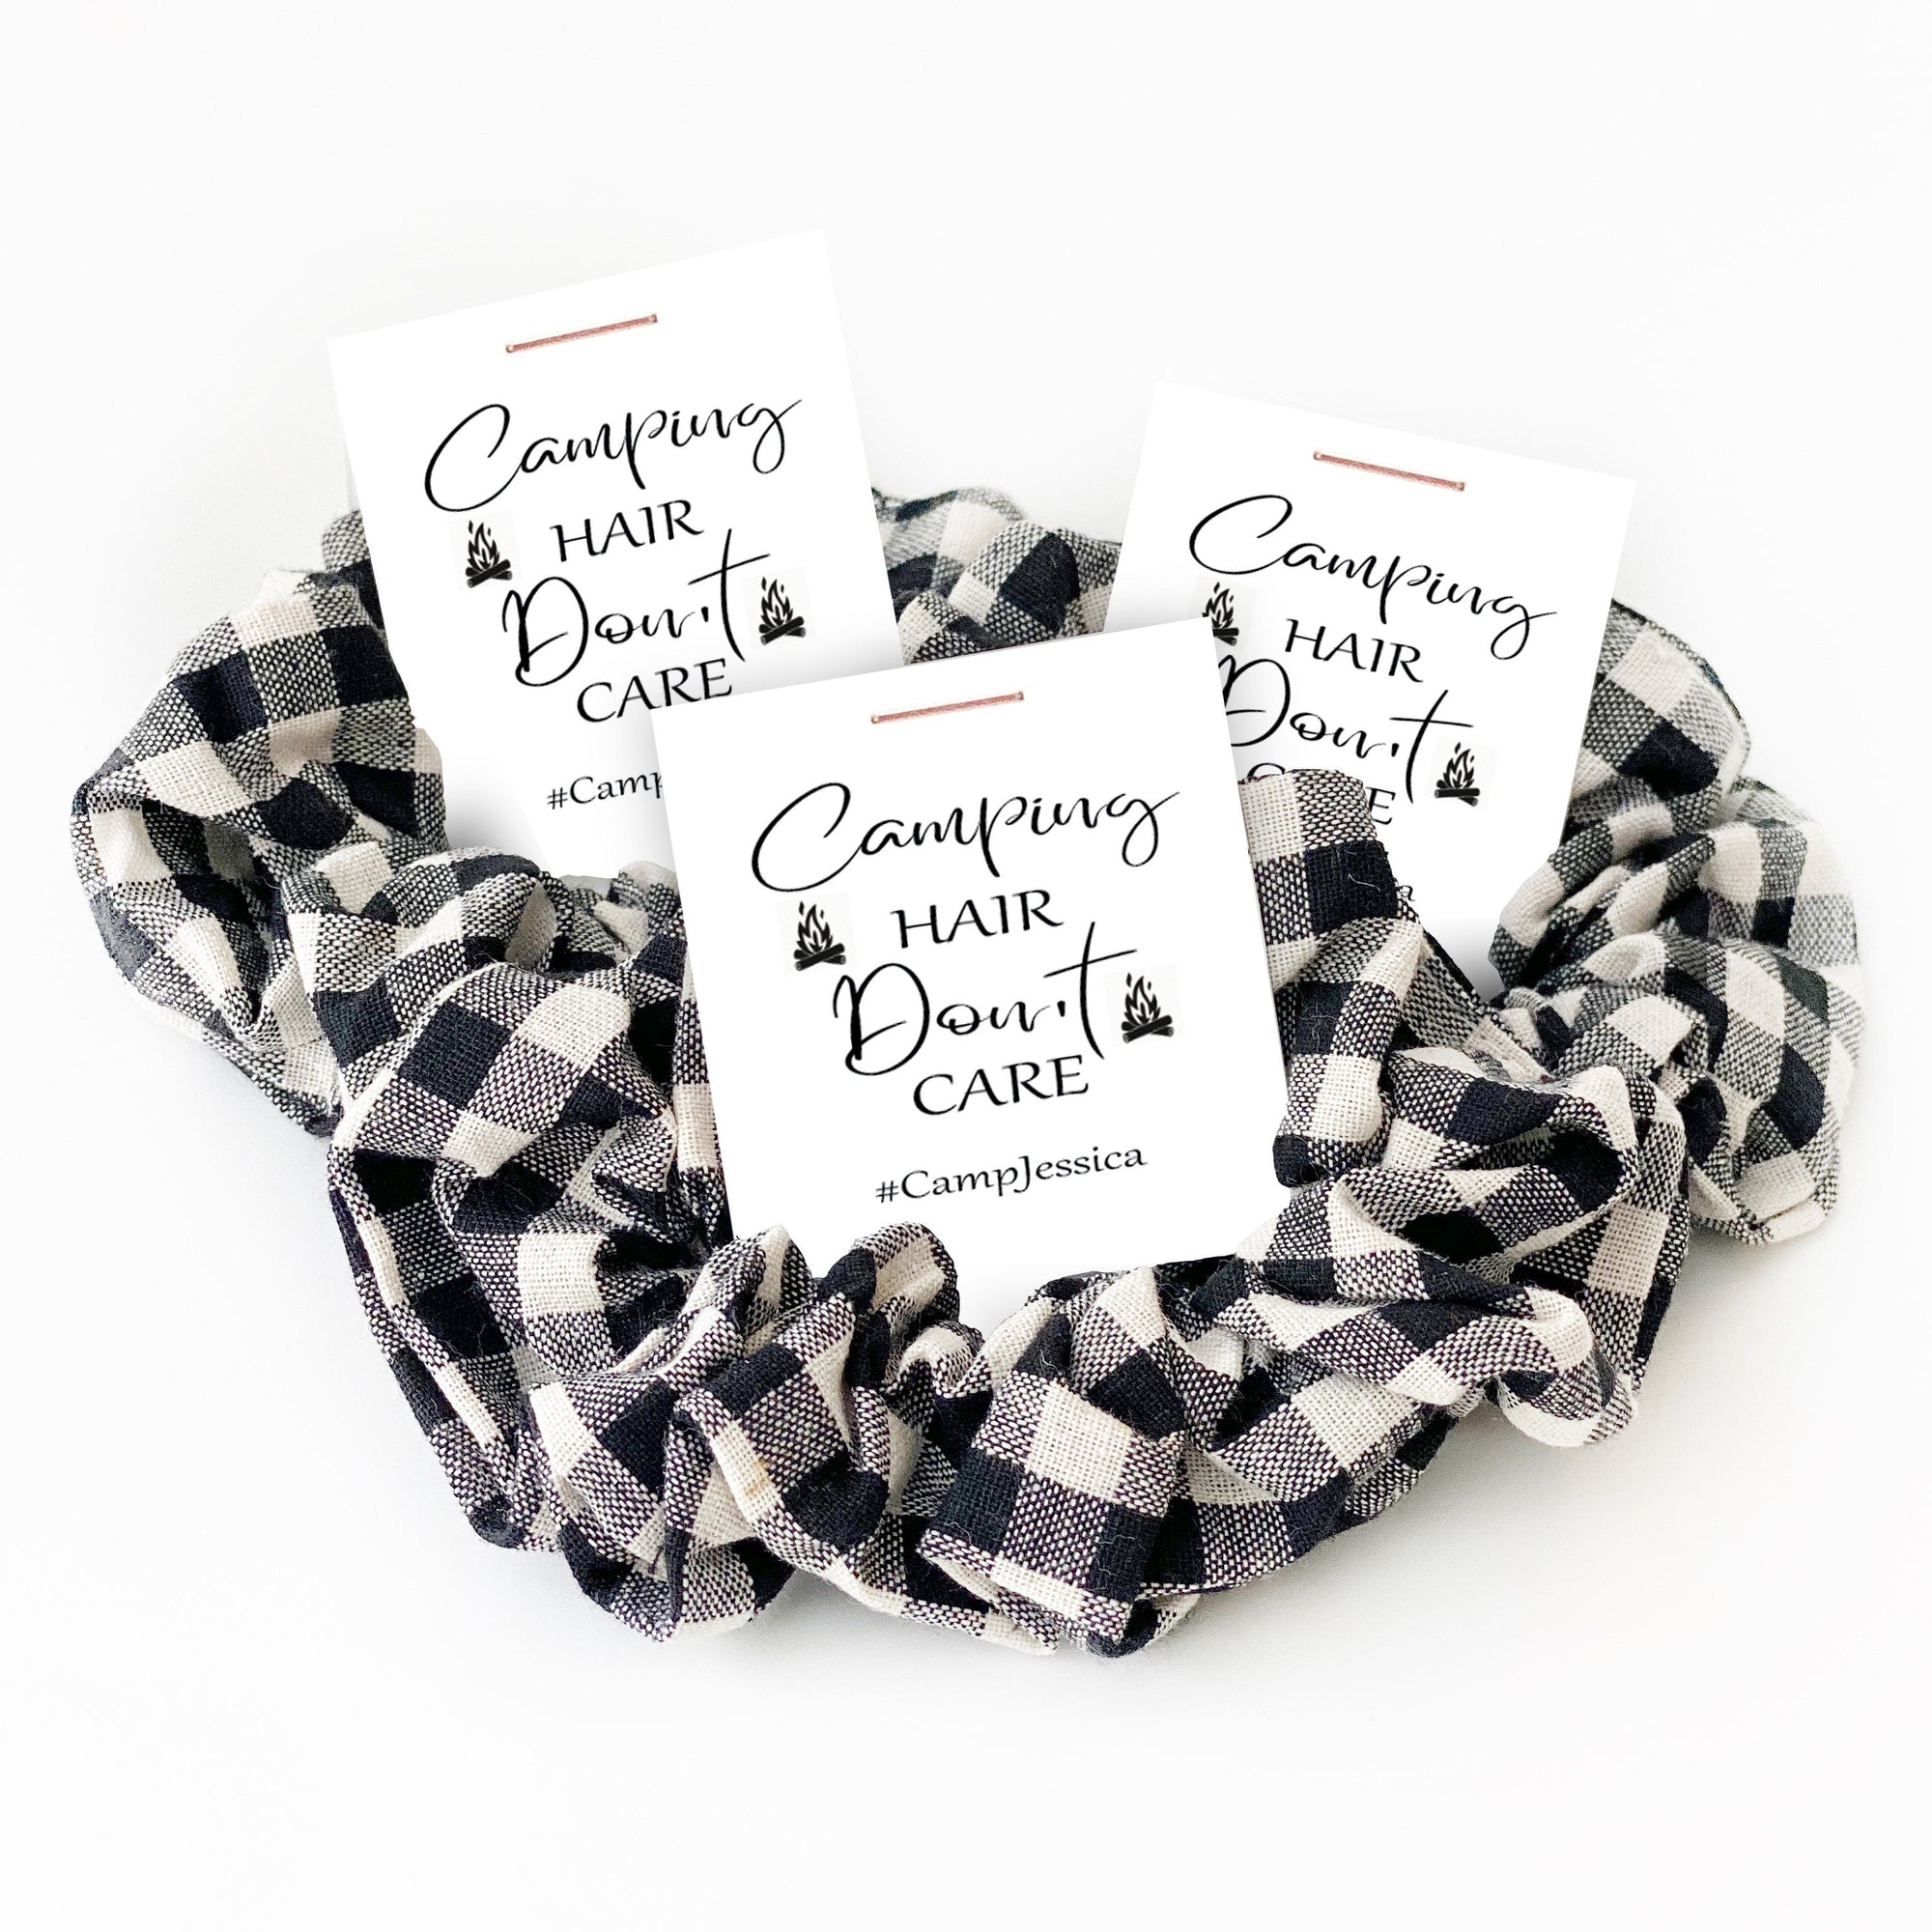 Camping Hair Don't Care, Buffalo Plaid Camping Birthday Party Favors, Glamping Hair Scrunchie